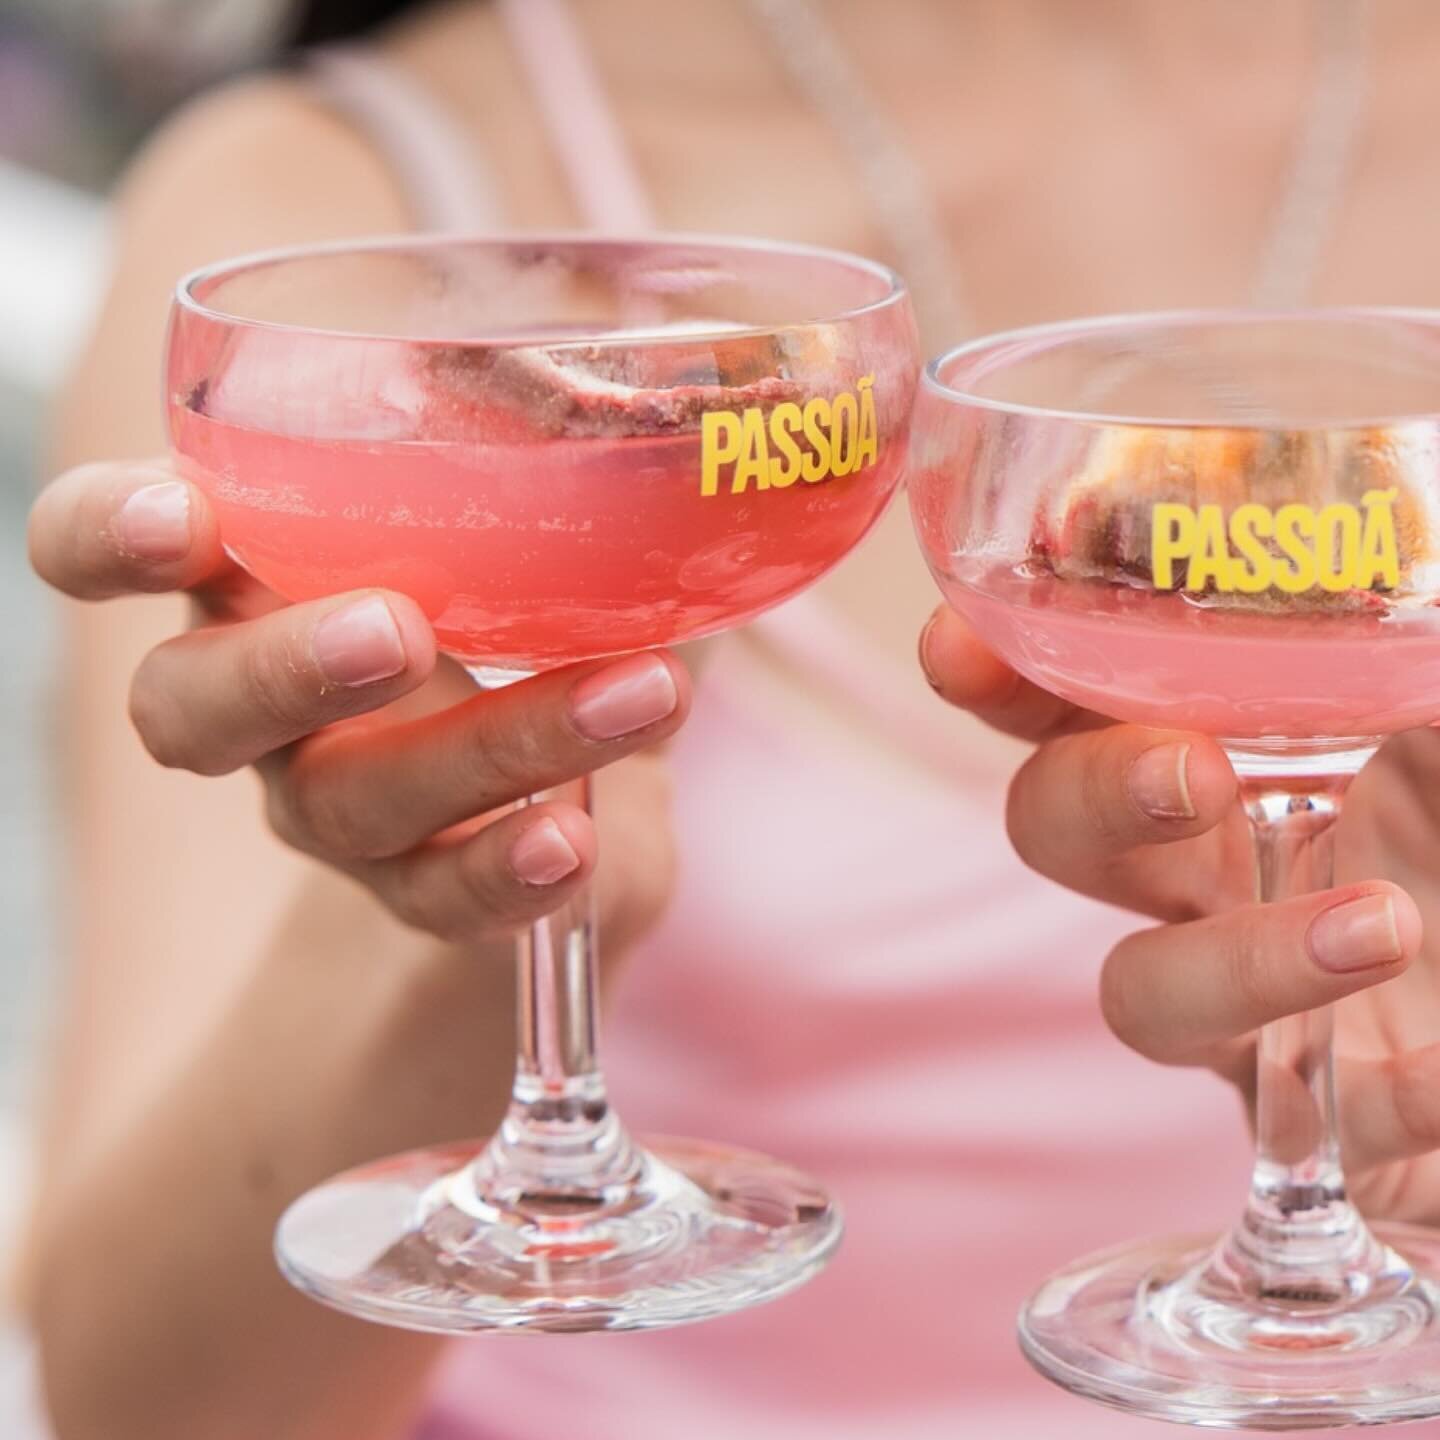 Something a little different! 🍹🌅

Thanks to @mavenpr.agency on Saturday I had the pleasure of snapping pics at the @passoa Sunset Sessions at @sofitelgoldcoast 

A fun filled + vibrant event 💜 

The Passo&atilde; passion fruit liqueur cocktails, g